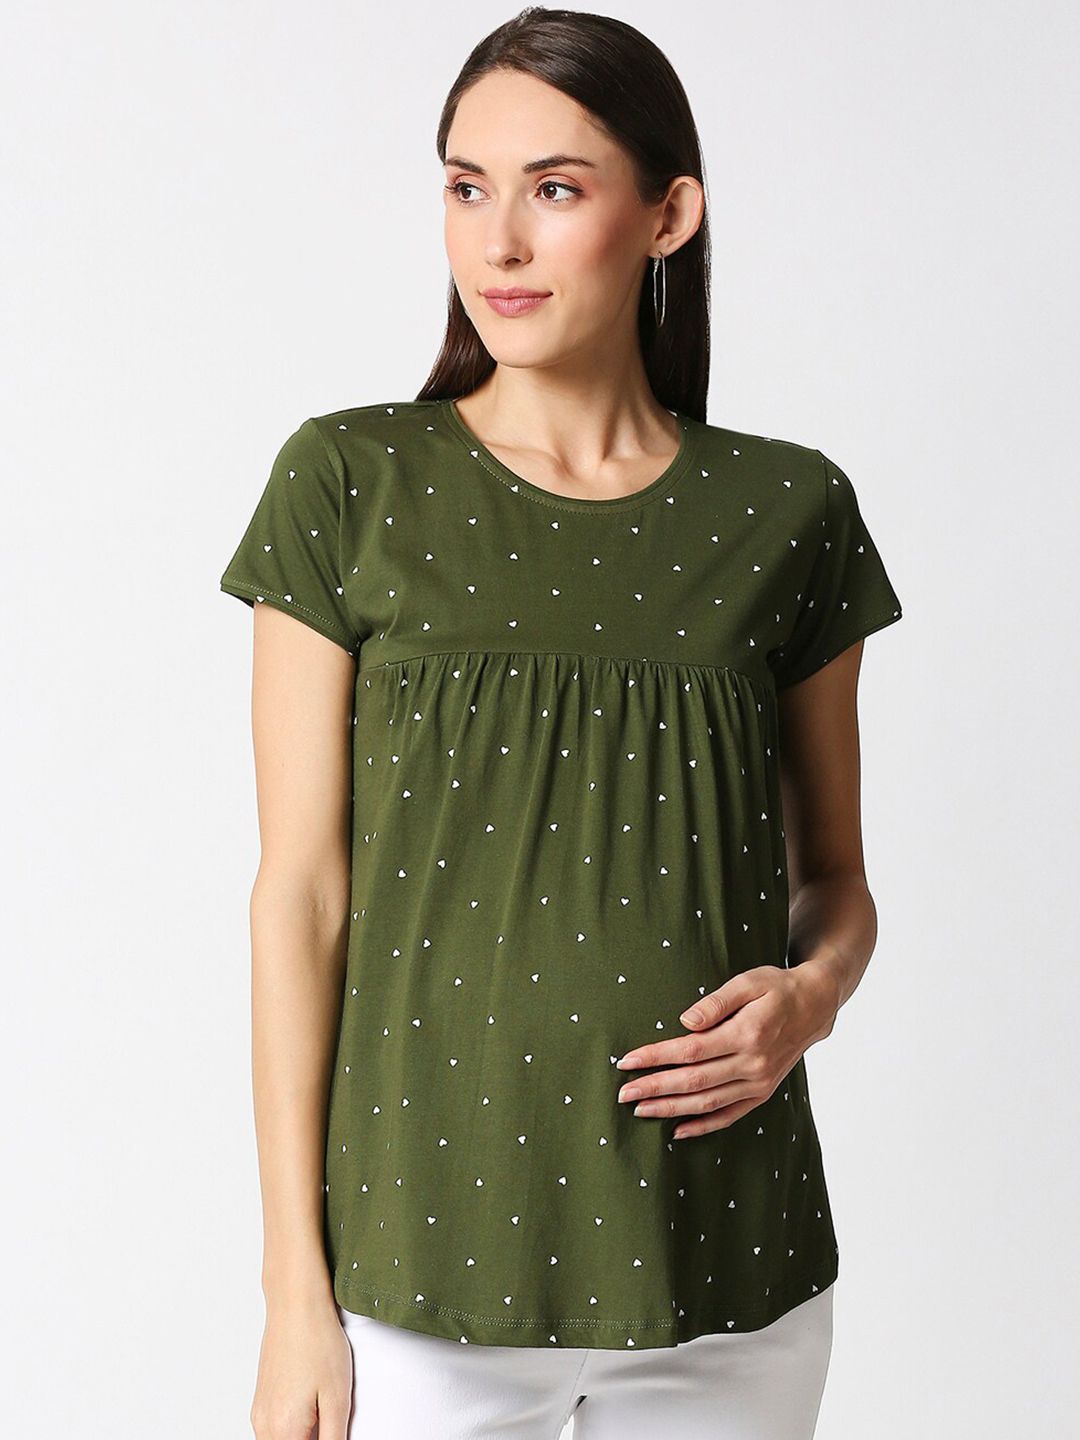 AV2 Olive Green Maternity Pure Cotton Print Top Price in India